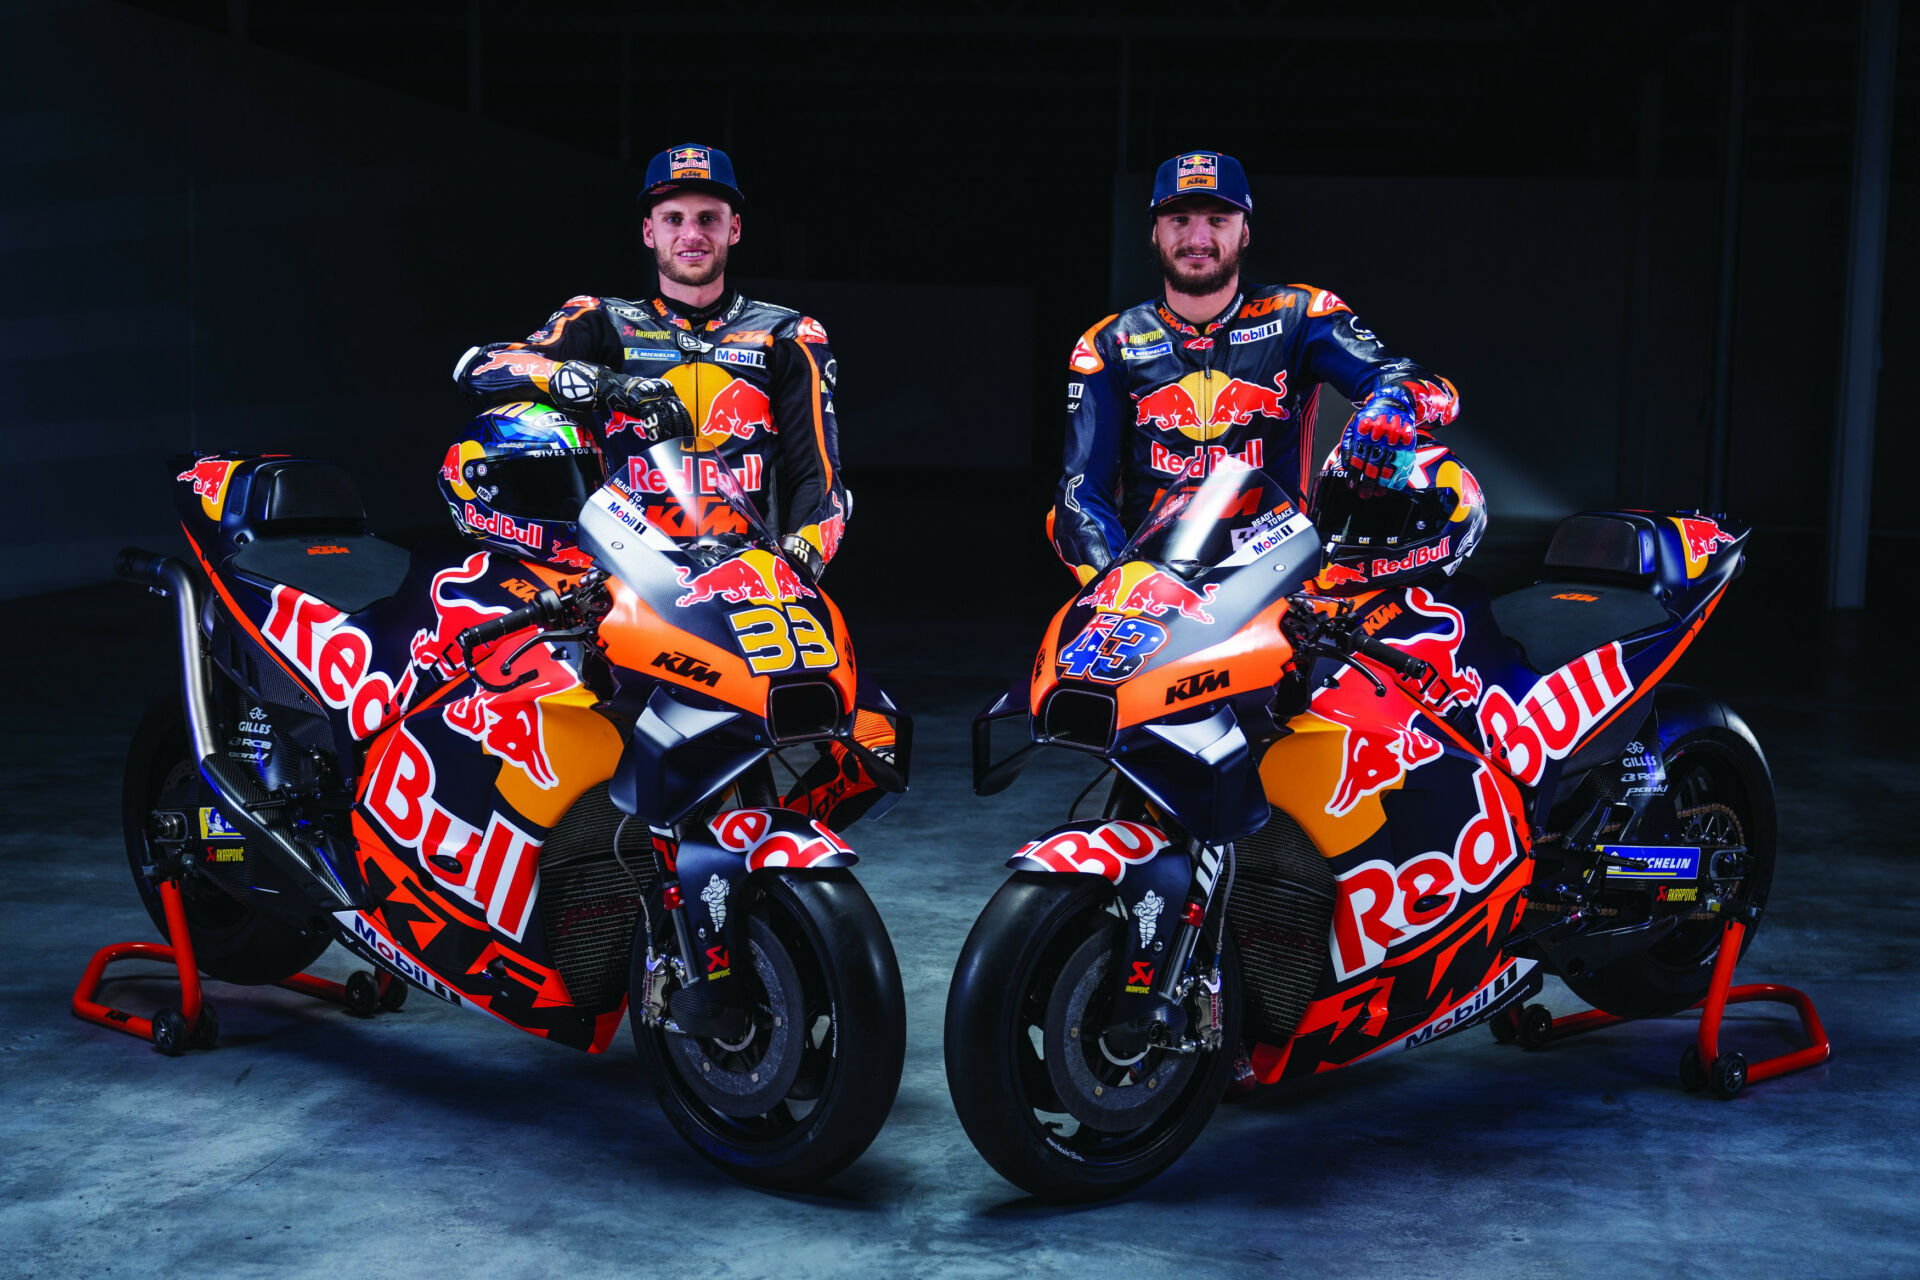 Red Bull KTM's 2023 MotoGP riders Brad Binder (left) and Jack Miller (right). Photo by Philip Platzer, courtesy KTM Factory Racing.